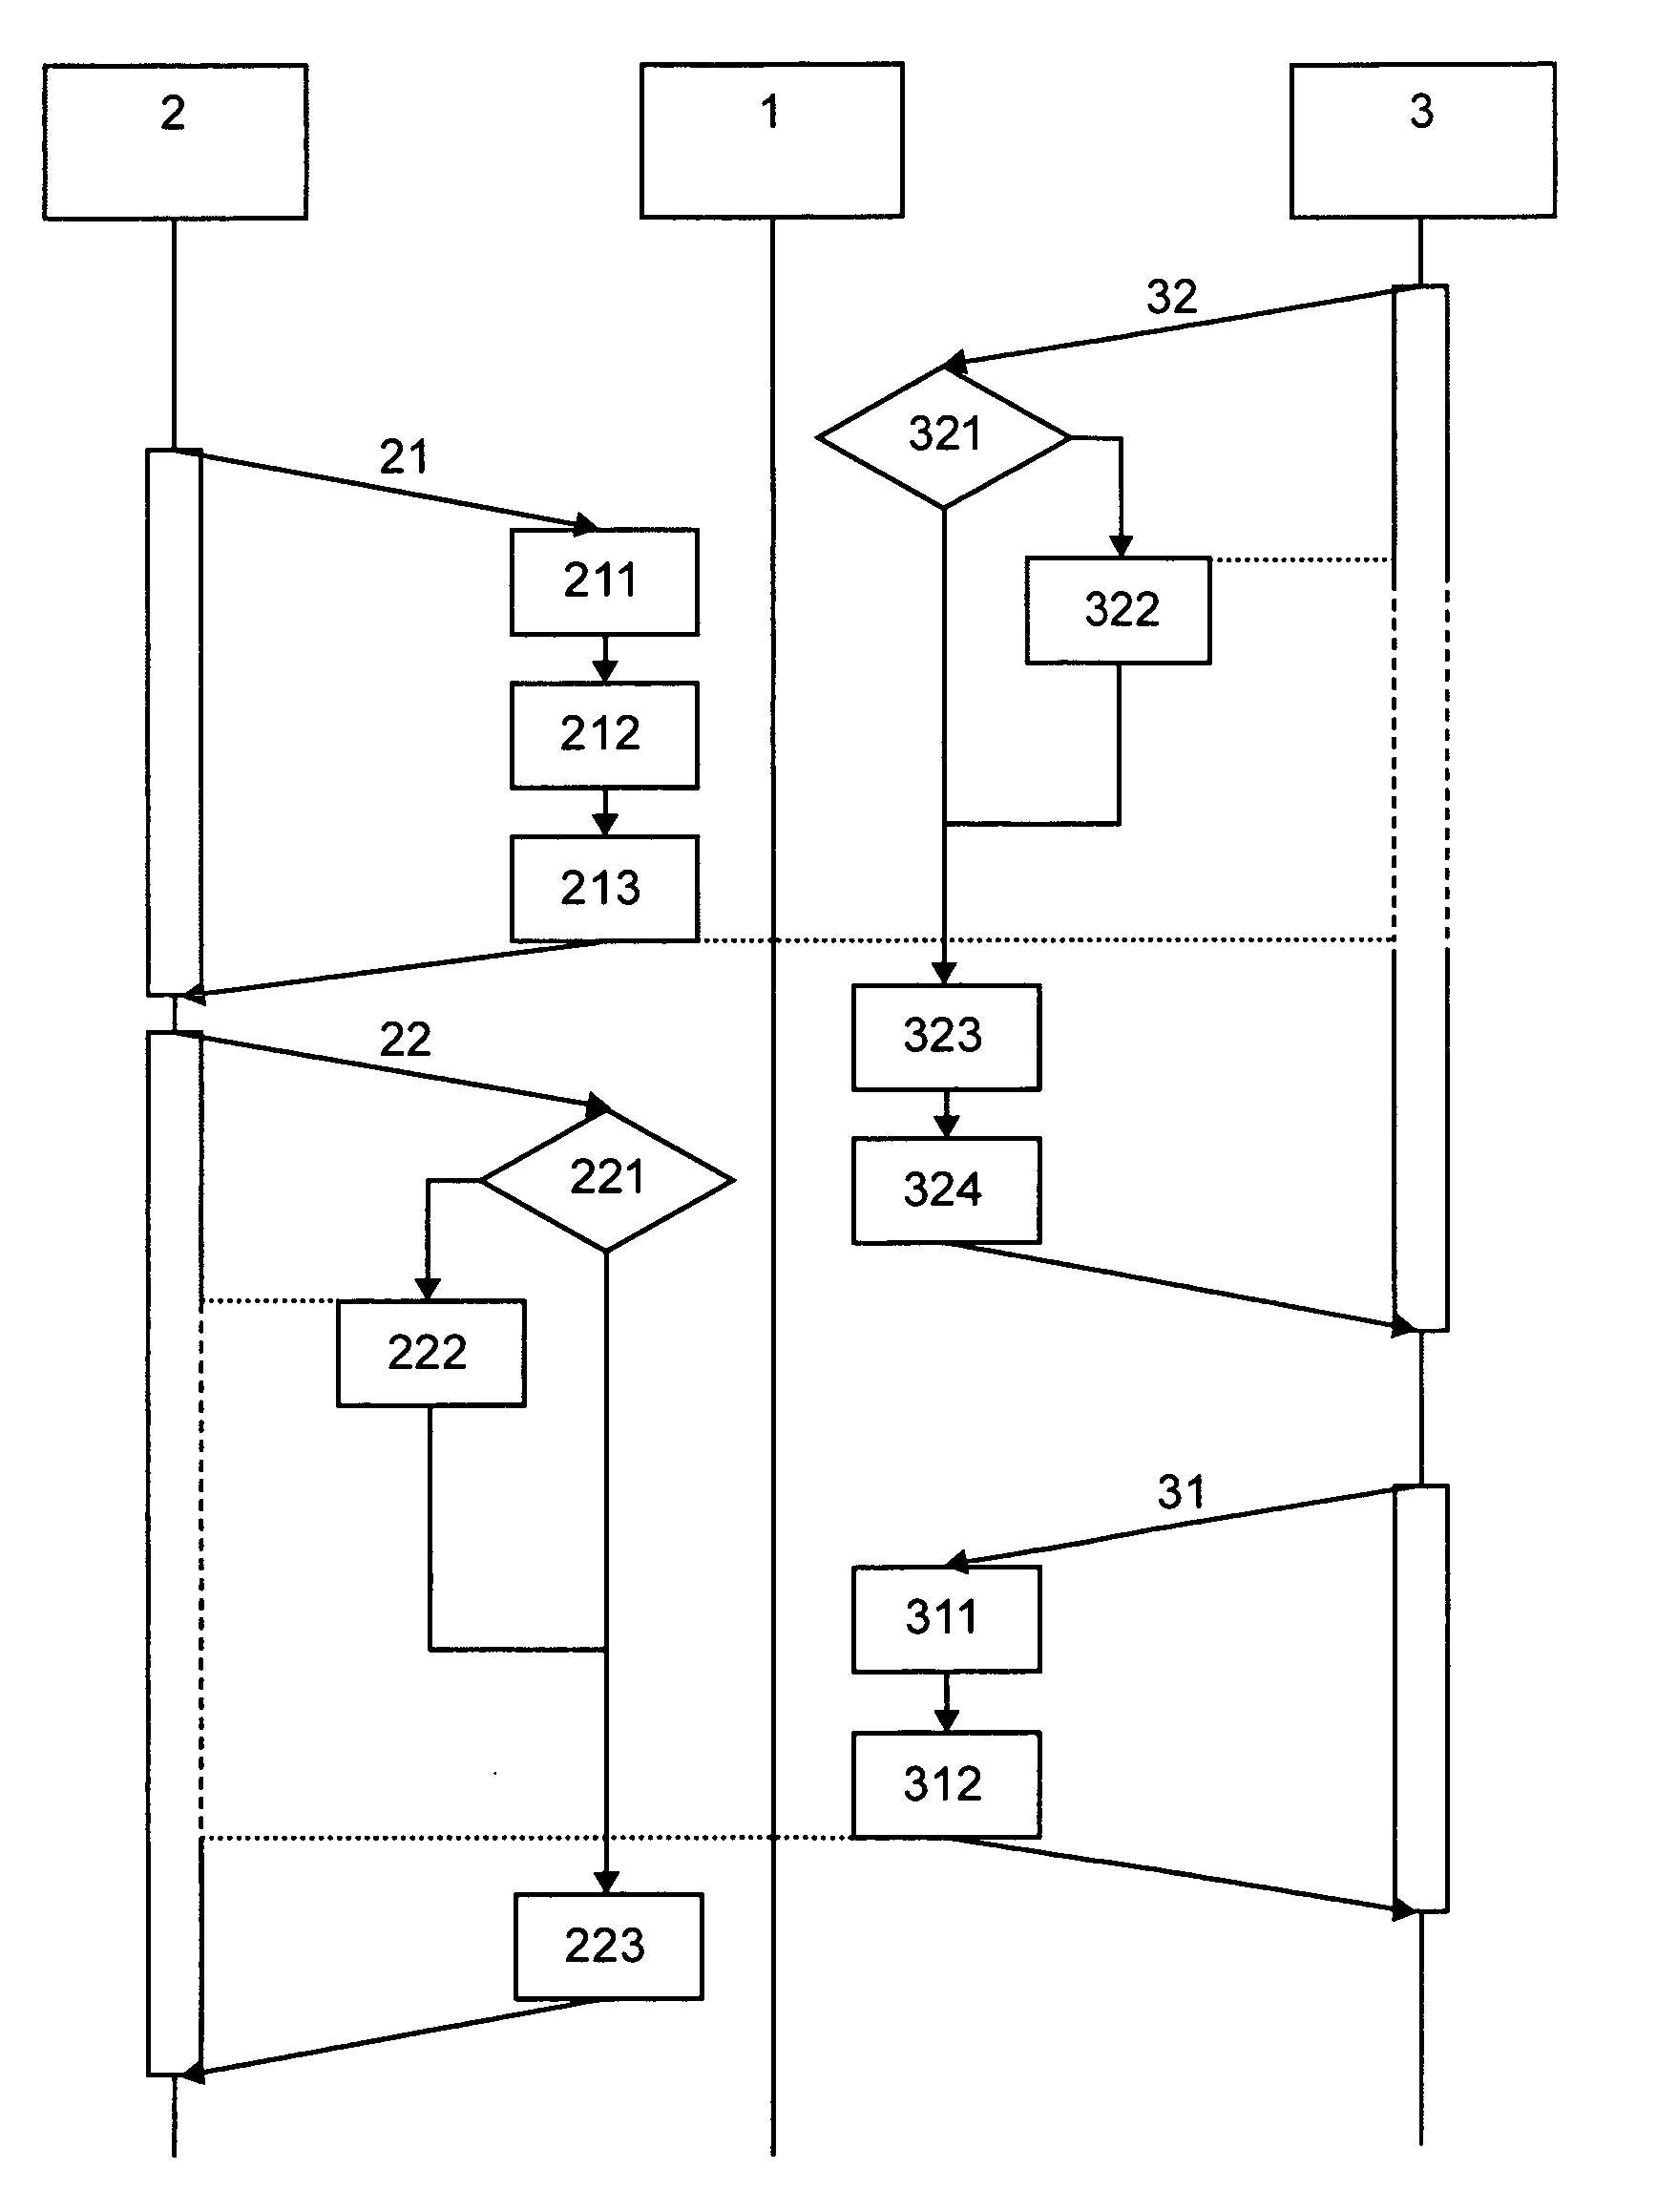 Method and interprocess communication driver for managing requests of a database client to a database server